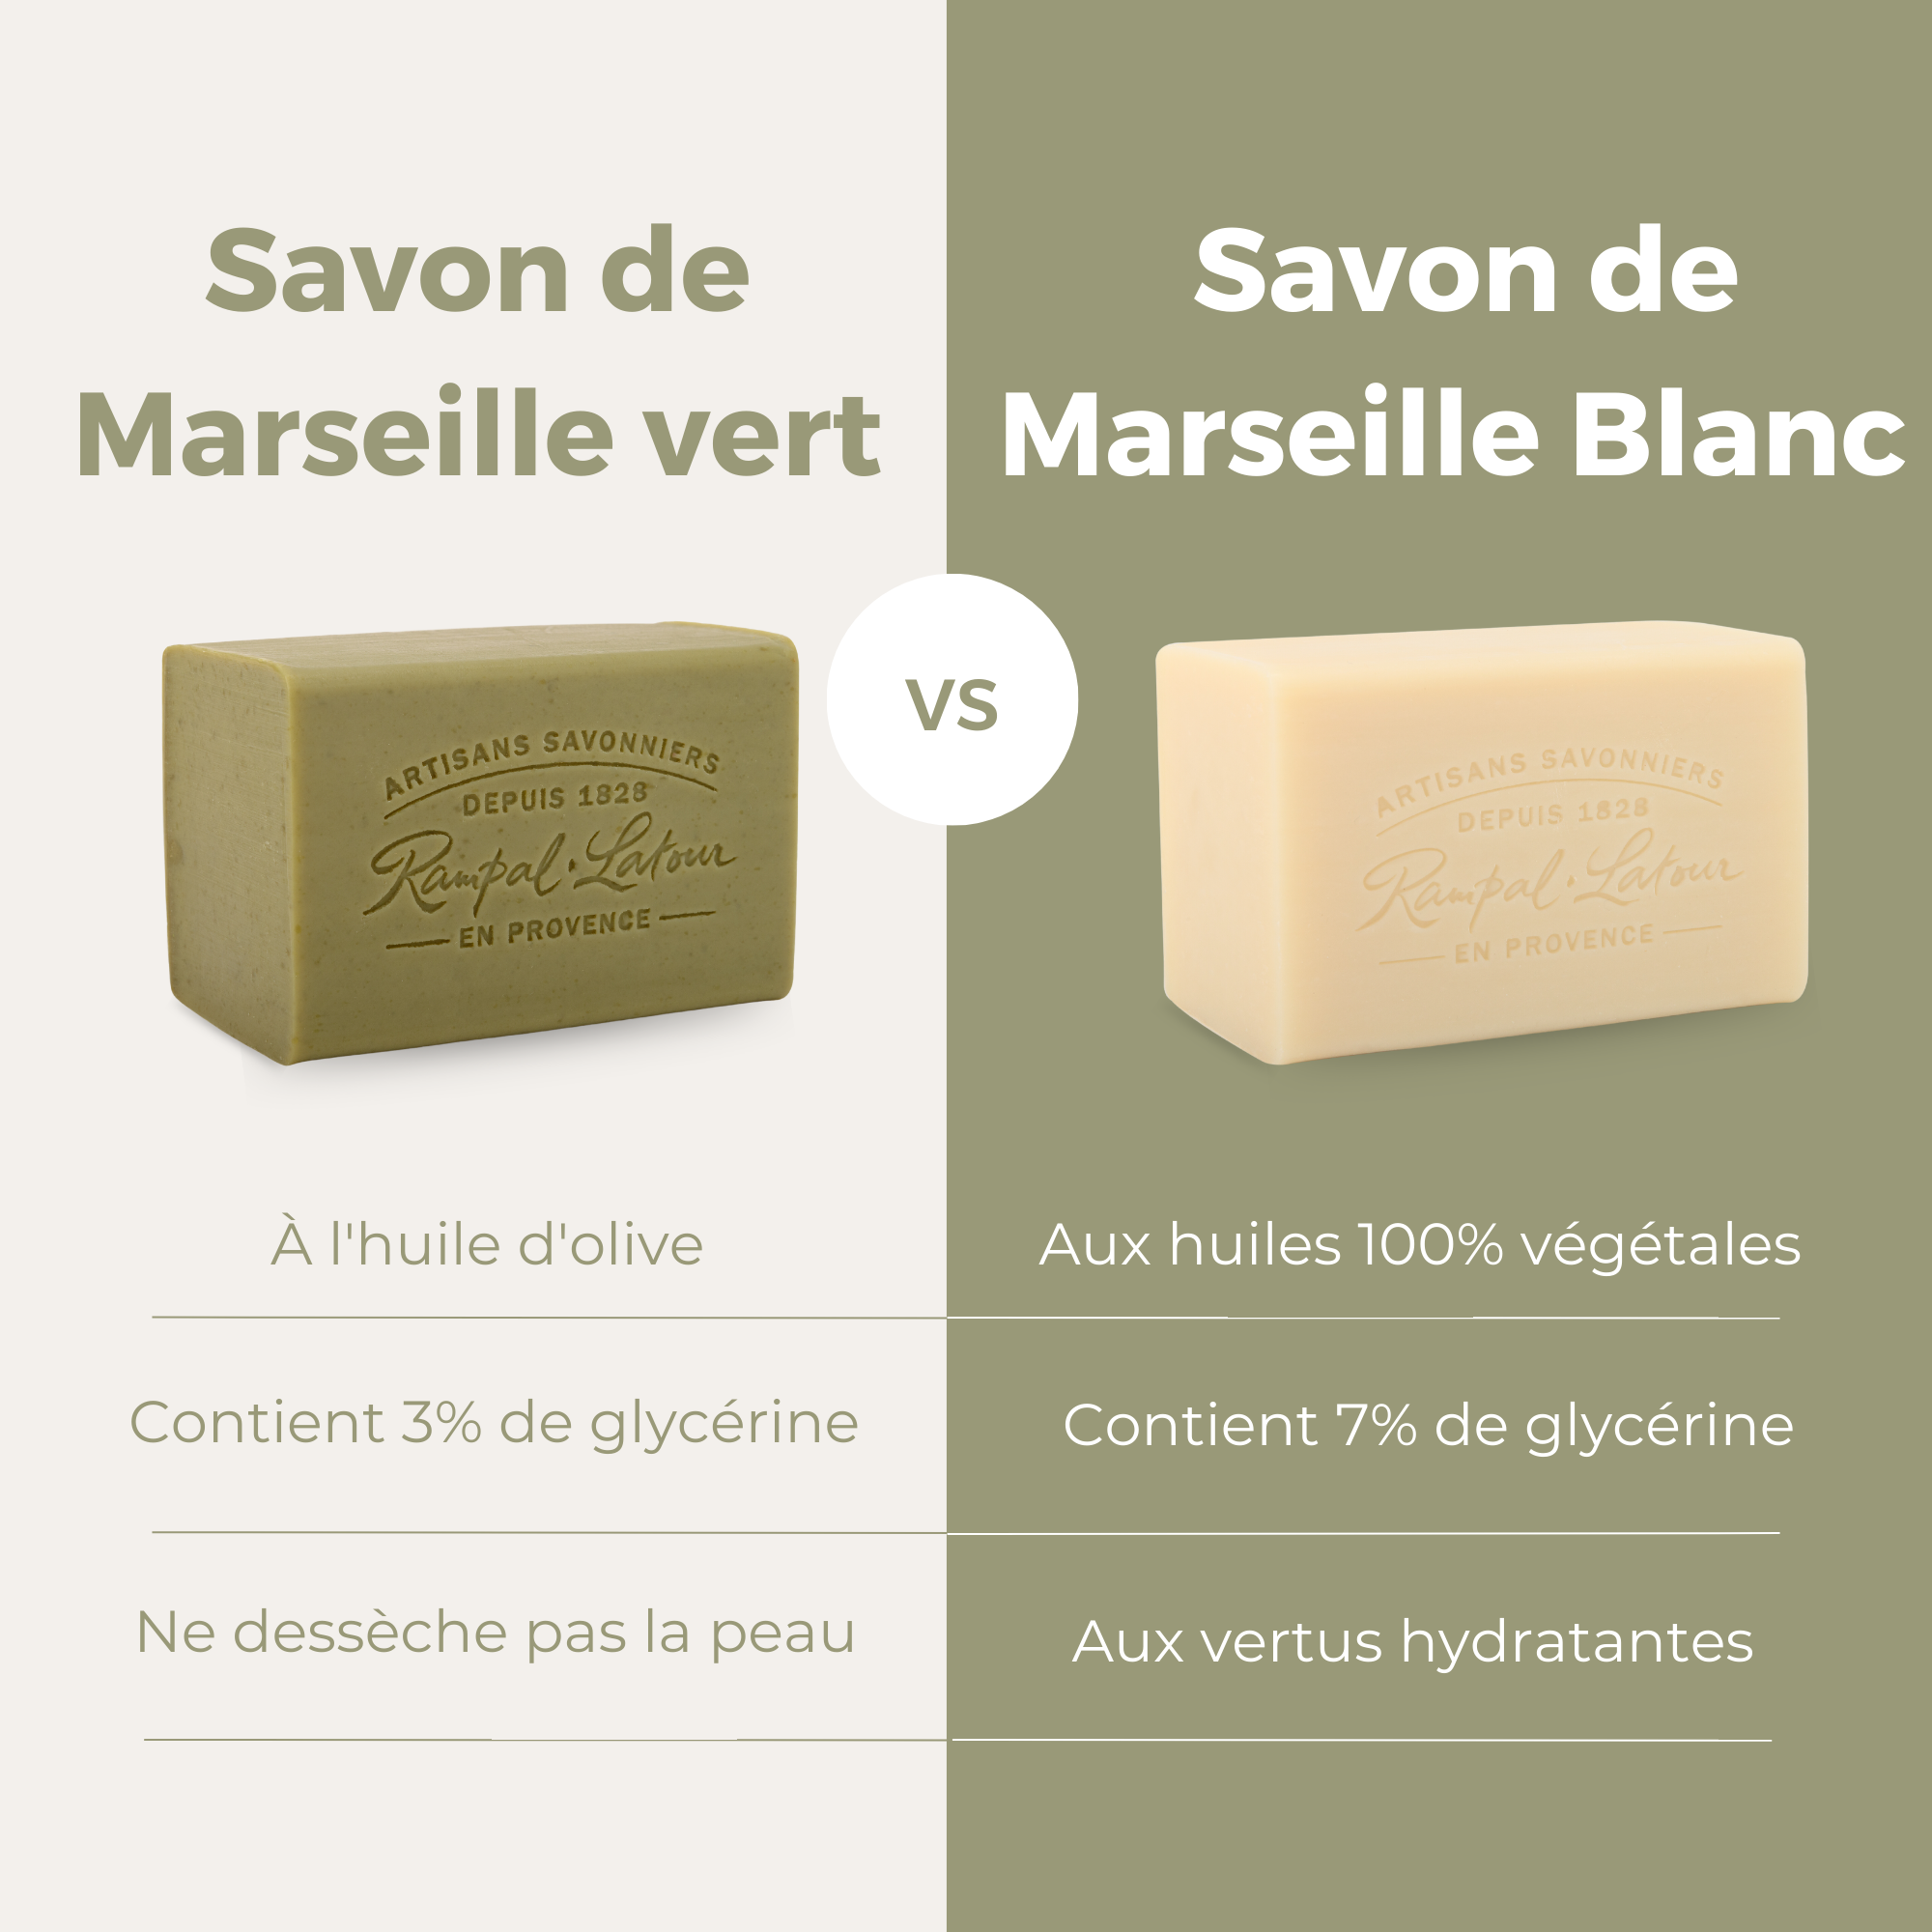 Marseille soap bar with vegetable oils 300g - Cosmos Natural